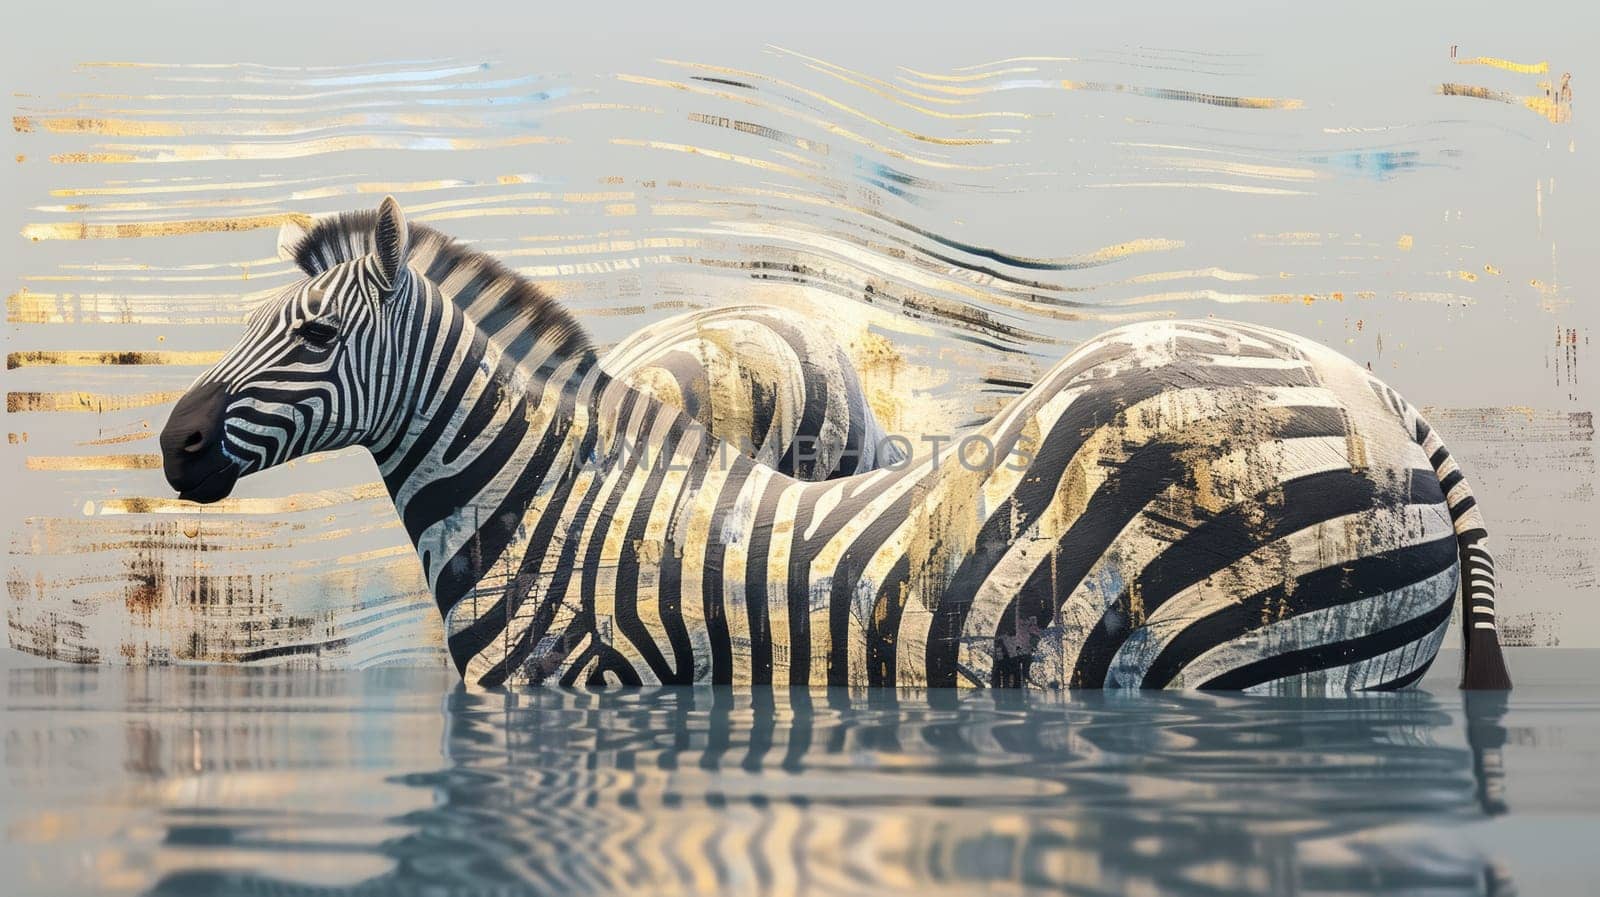 A zebra is swimming in a body of water with other zebras